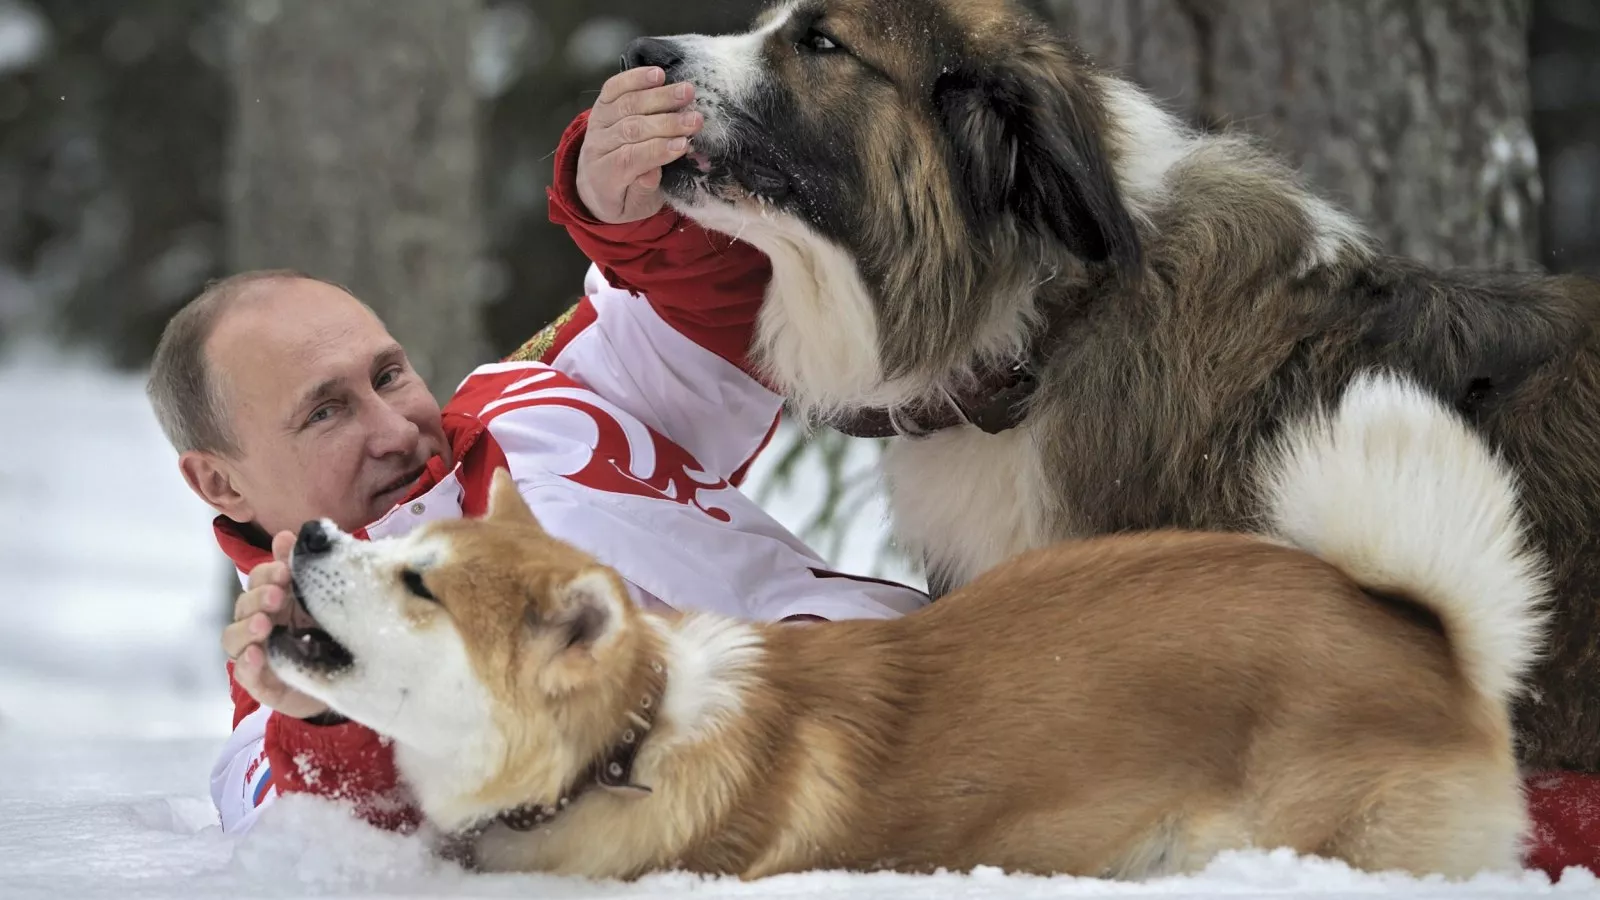 Russia's Dogs Told to Quiet Down, but Putin's Their Biggest Fan